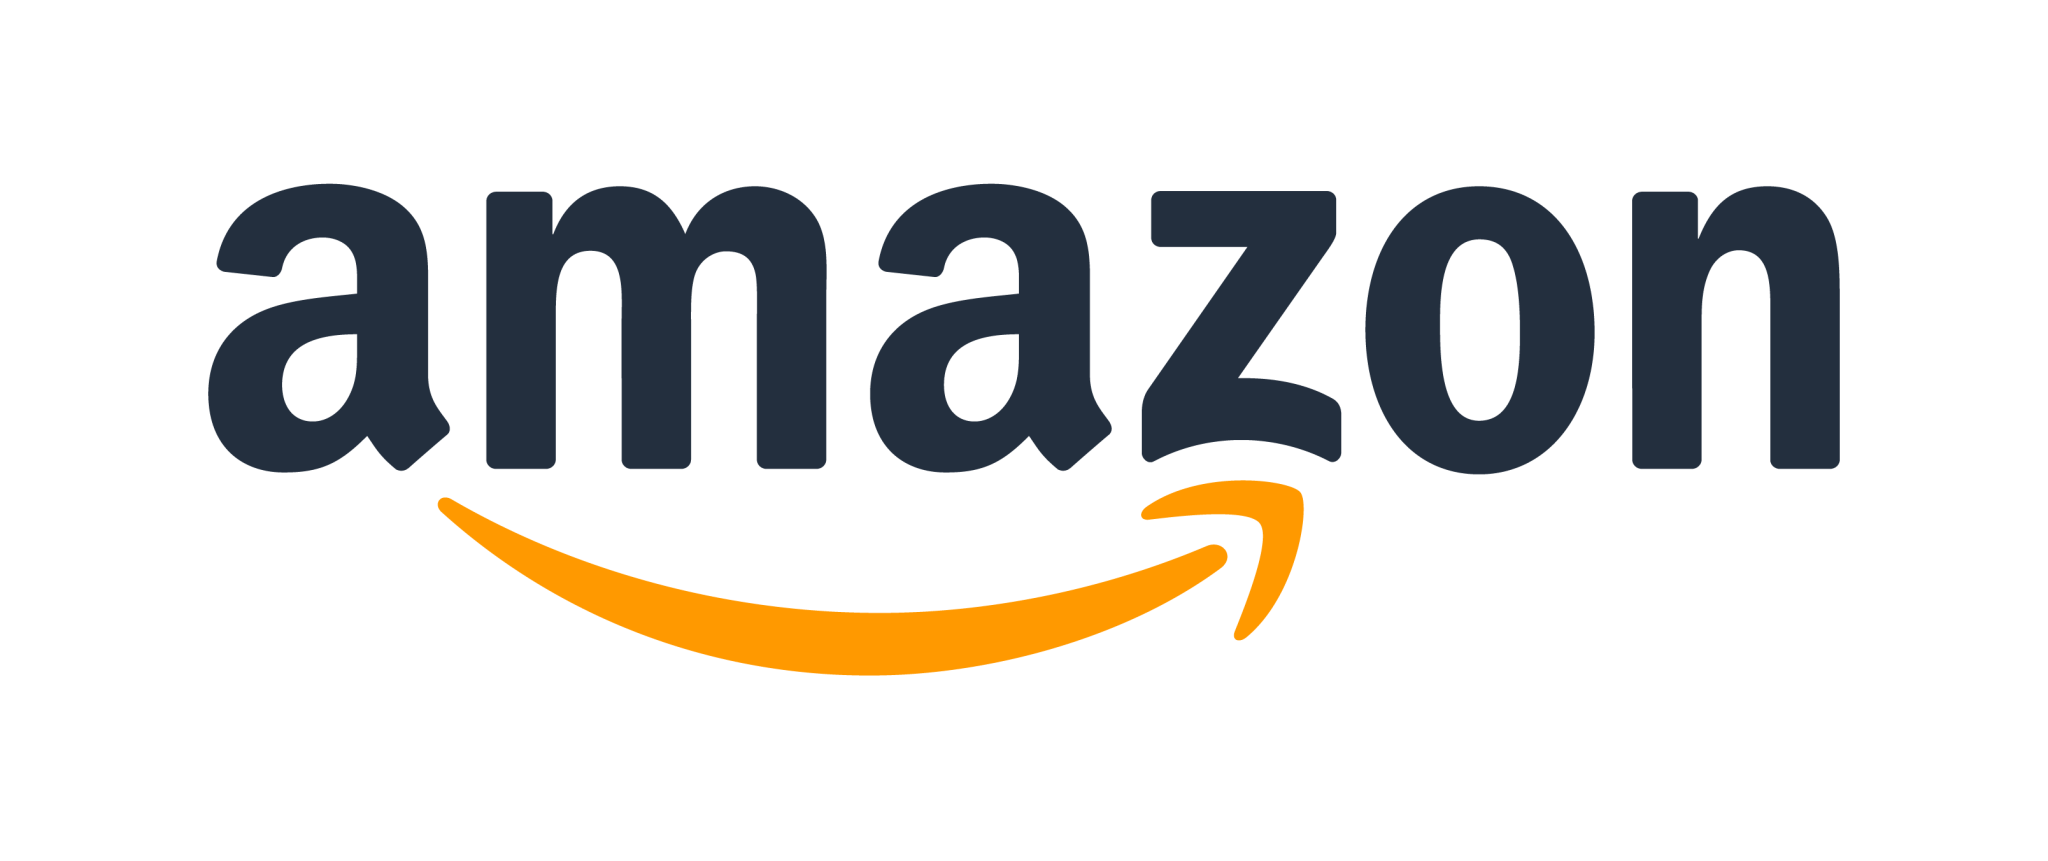 Amazon marketplace specialists - contact Optimizon on how we can help you